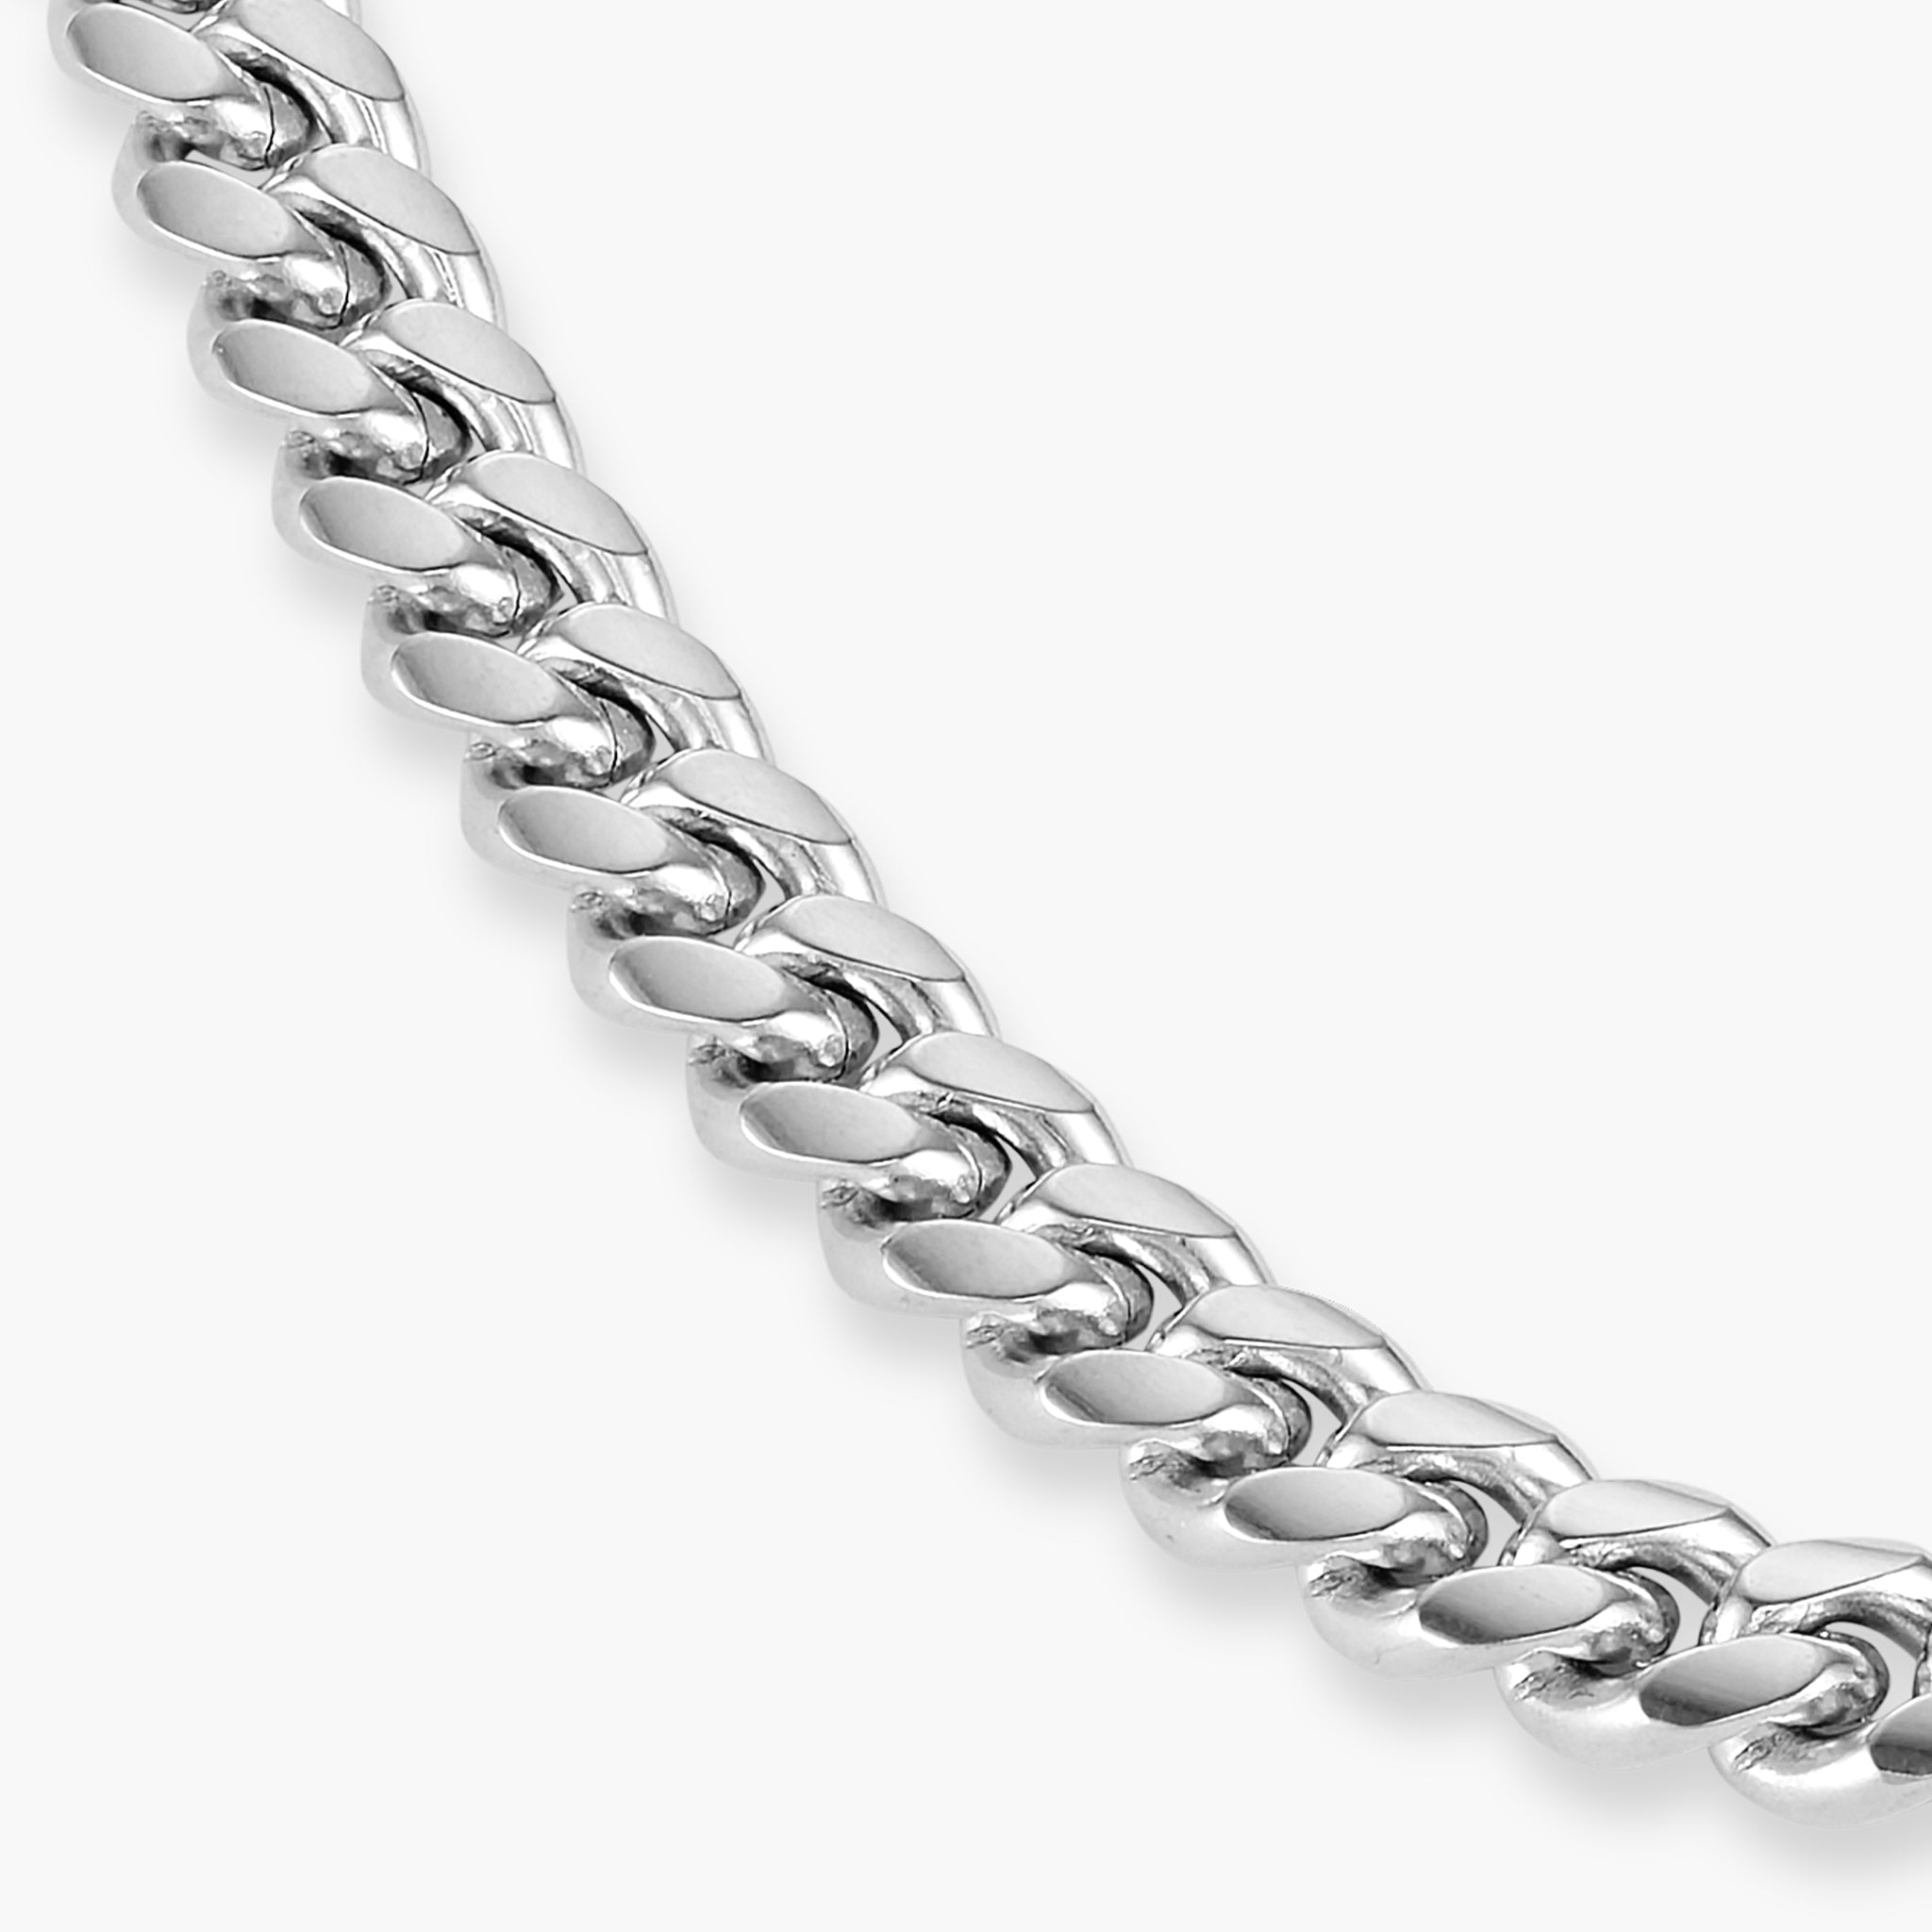 10MM Pearl Pant Chain for Men, Stainless Steel Metal Strap, Mixed Cuban  Chain, 1 or 2 Layers, Tarnish Free, Gift for Brother, Son, Boyfriend 